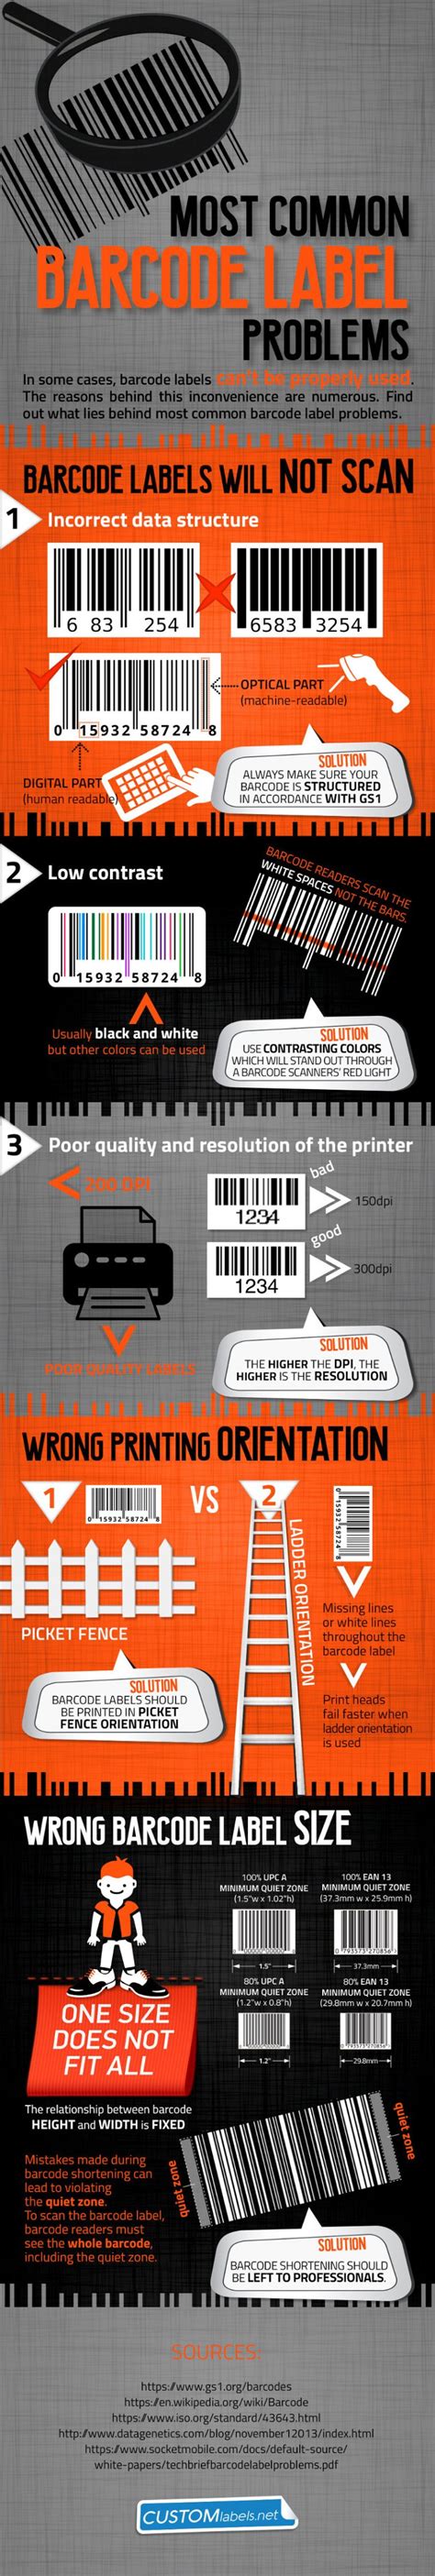 common barcode label problems   easily solve infographic biz epic